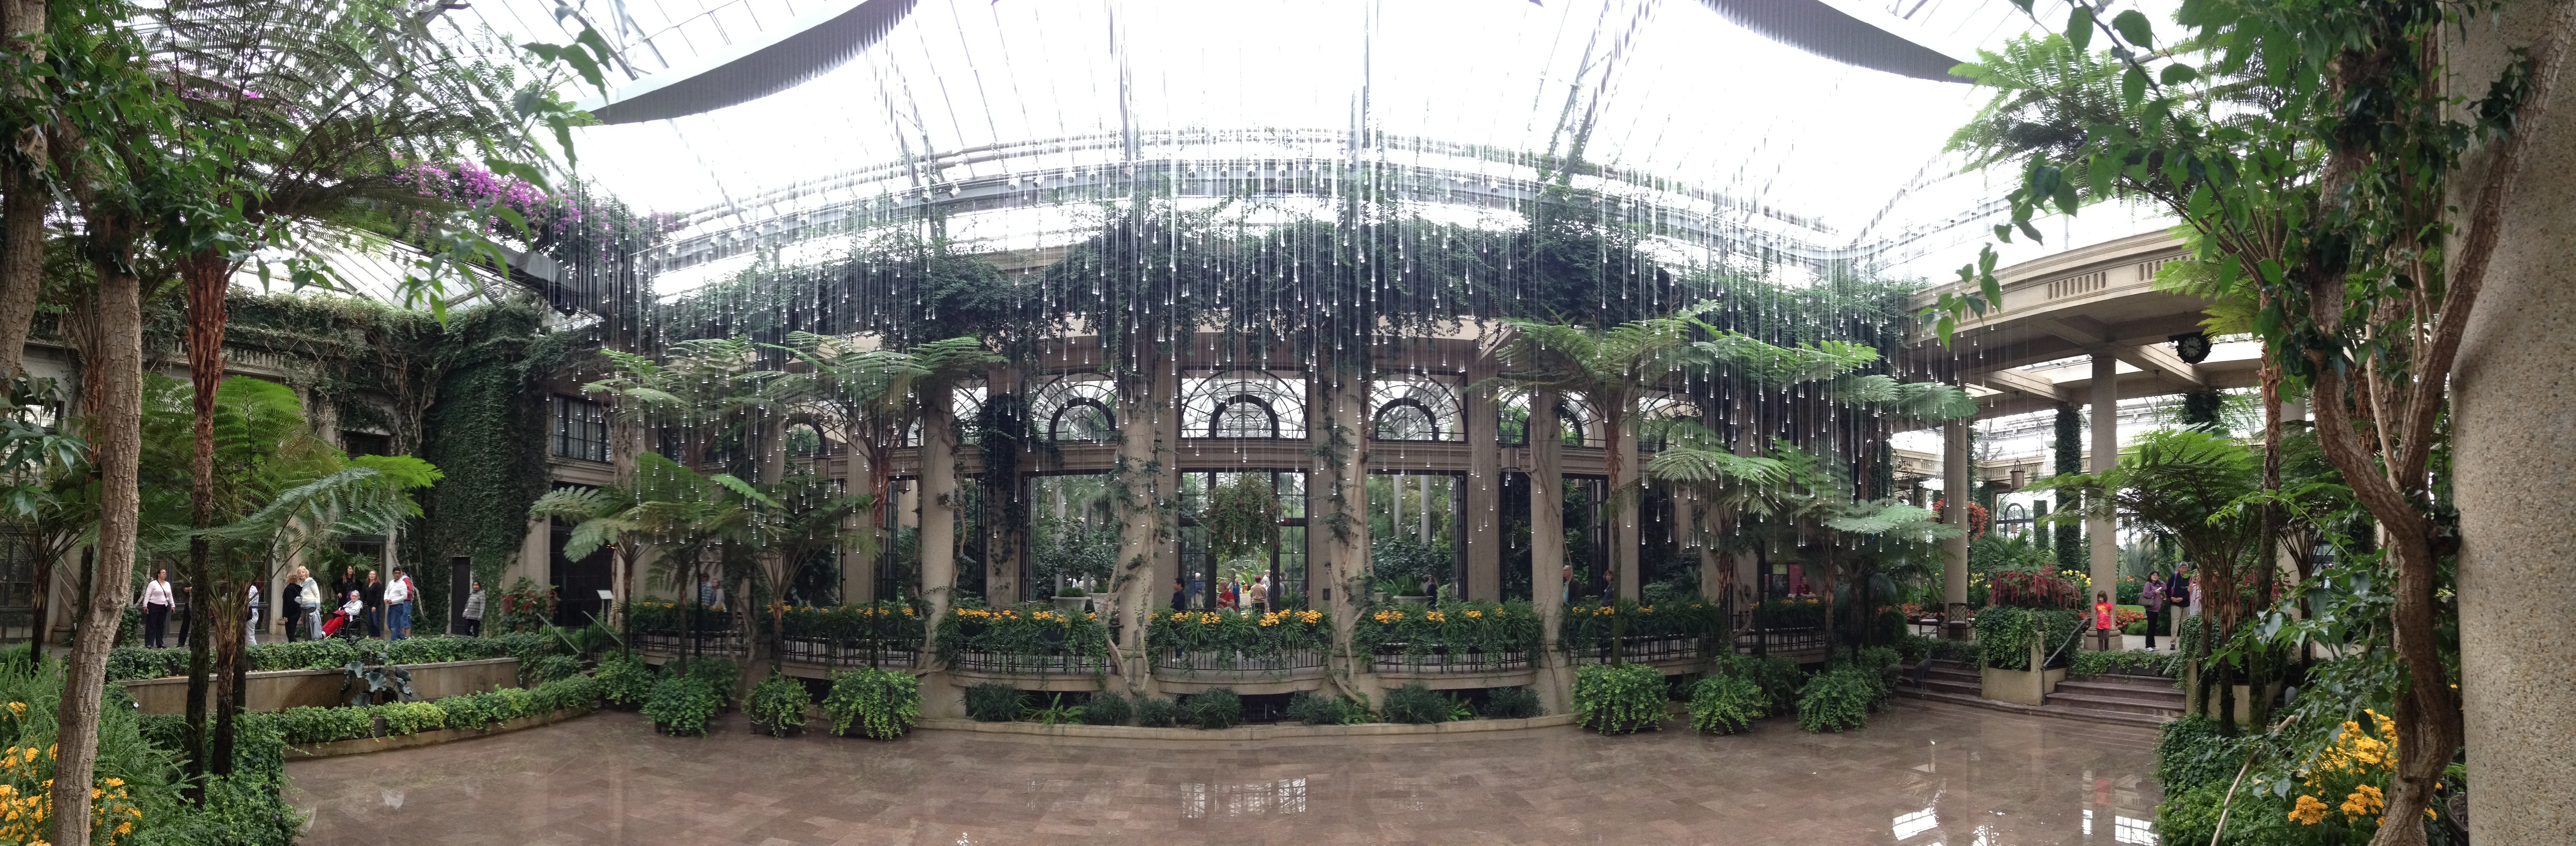 Inside the Conservatory